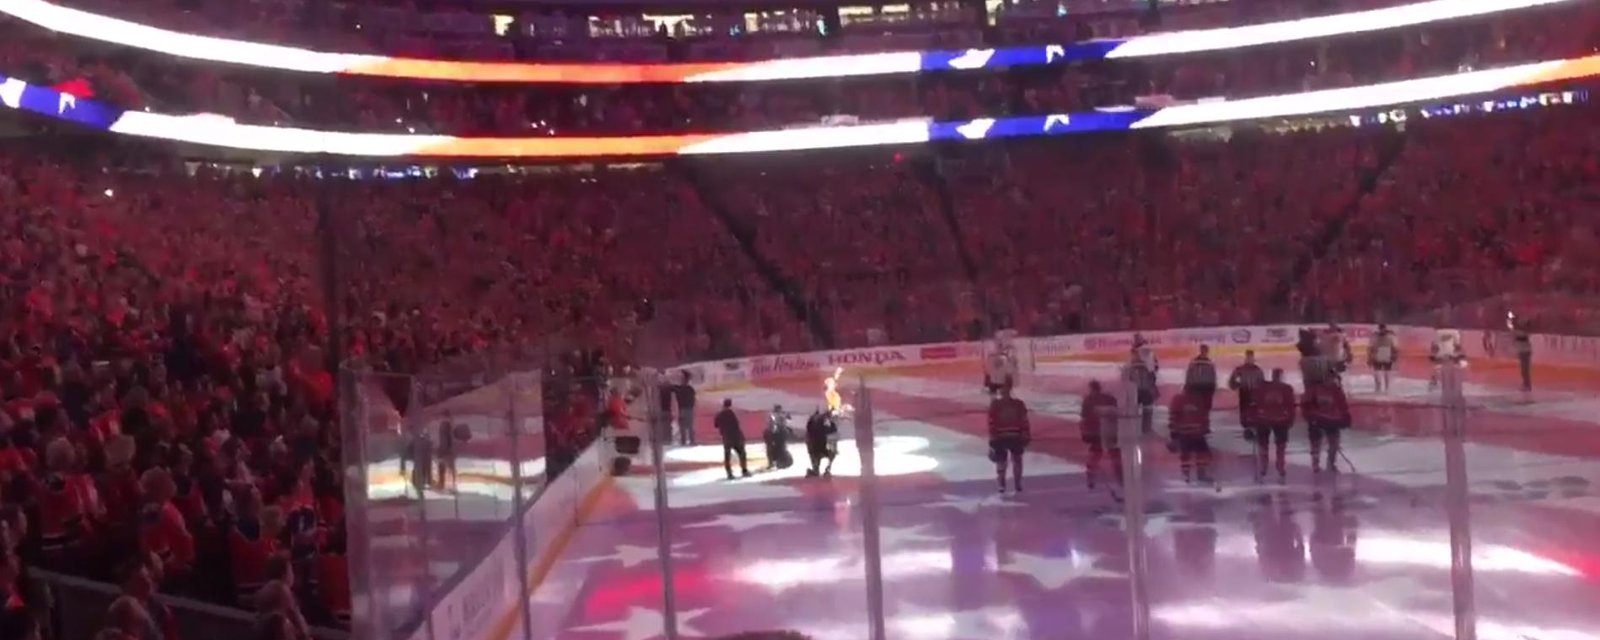 Edmonton's fans sing US National Anthem in amazing moment! 